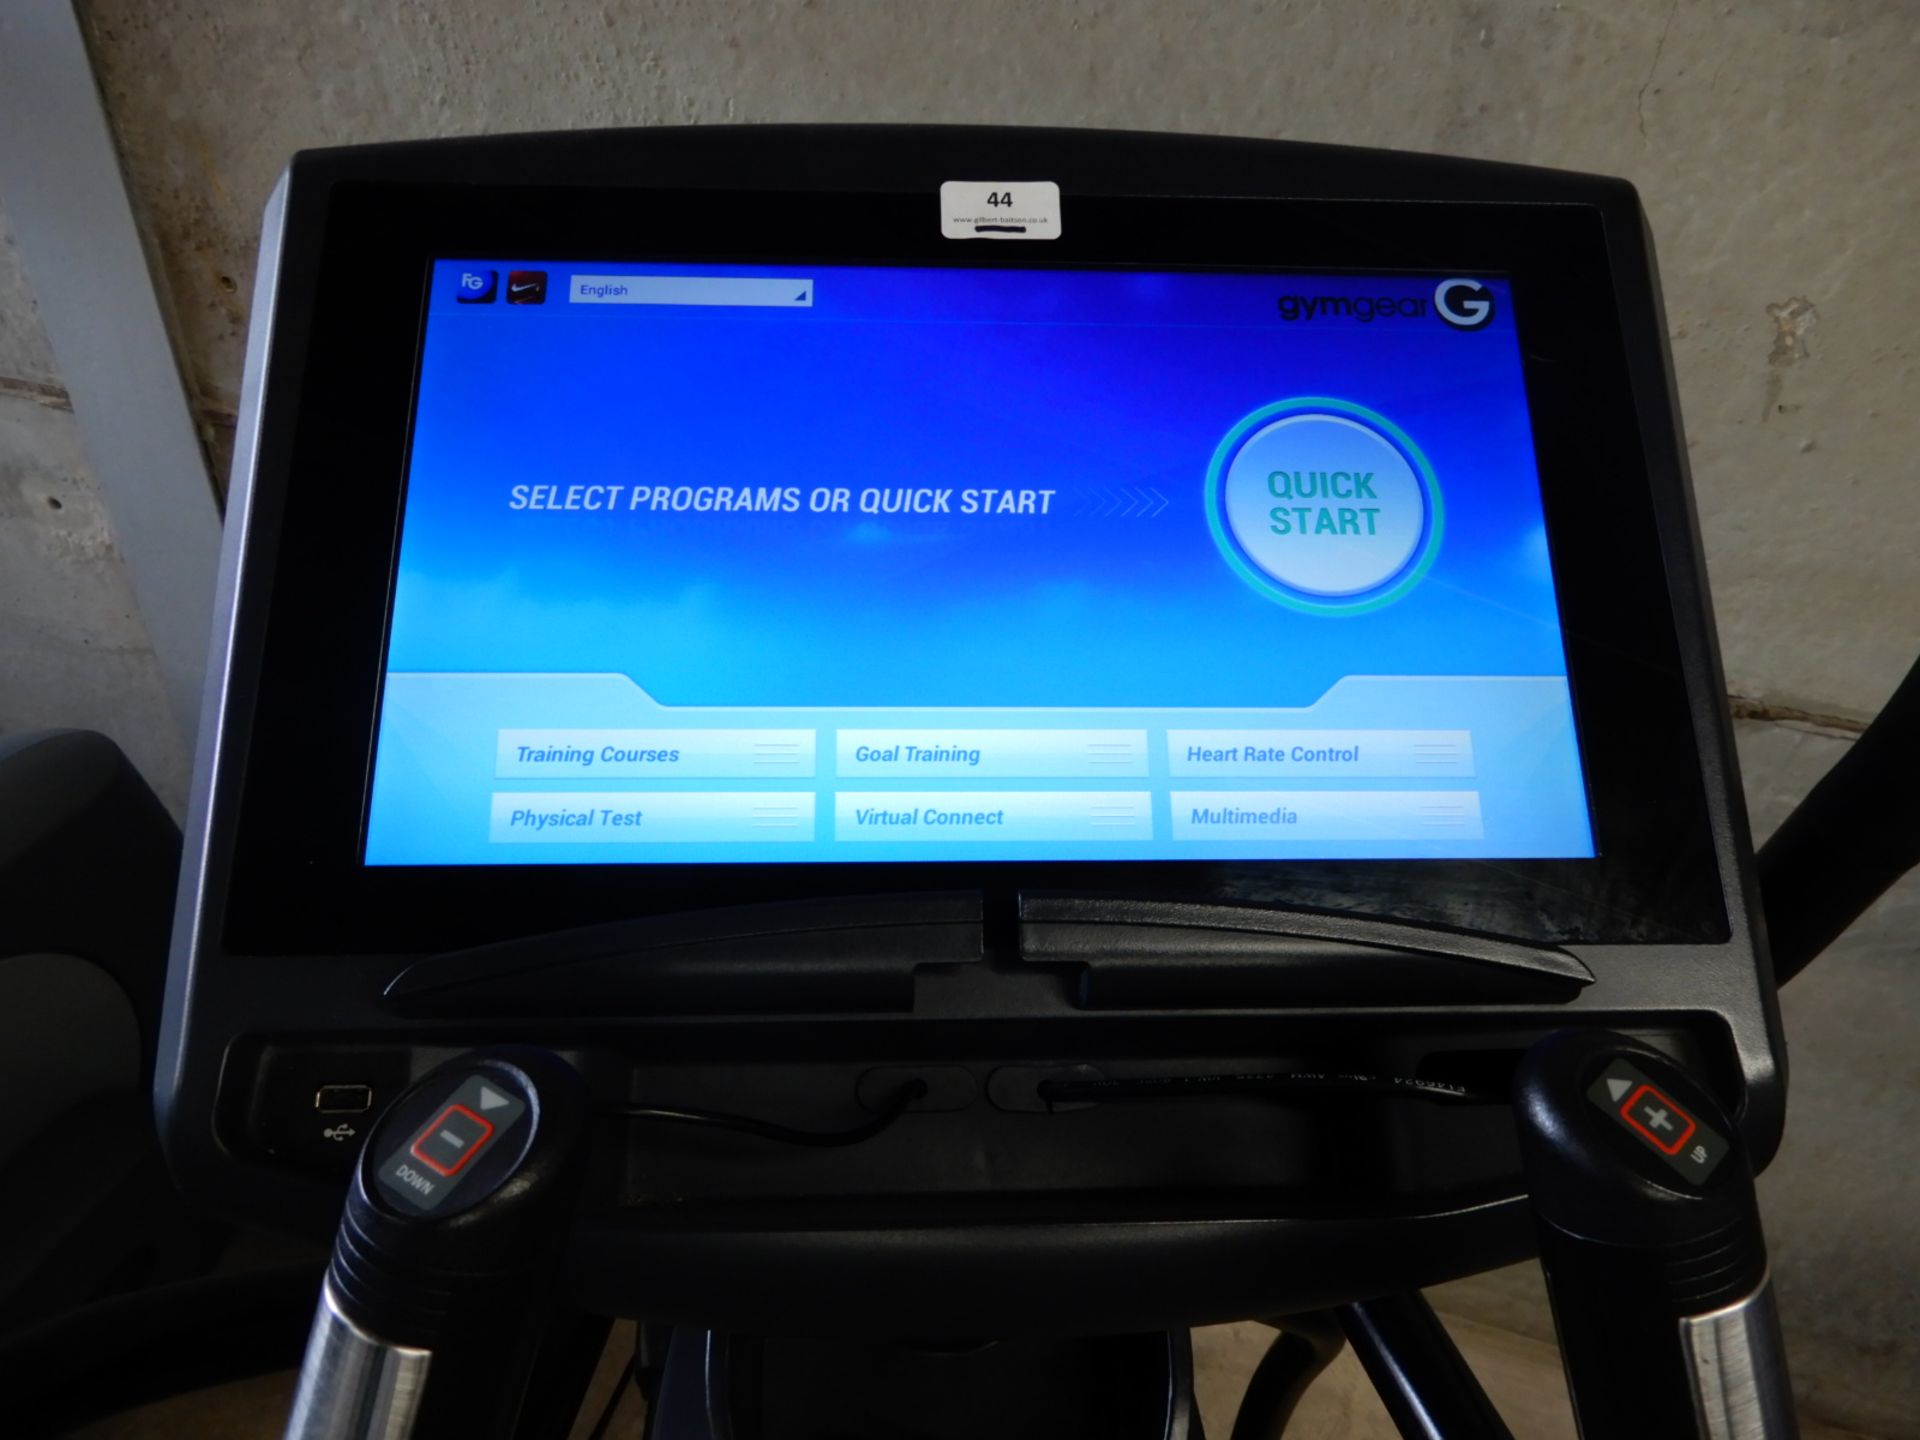 *Gym Gear Elite X-90E Elliptical Cross Trainer with Touchscreen Display - Image 2 of 2